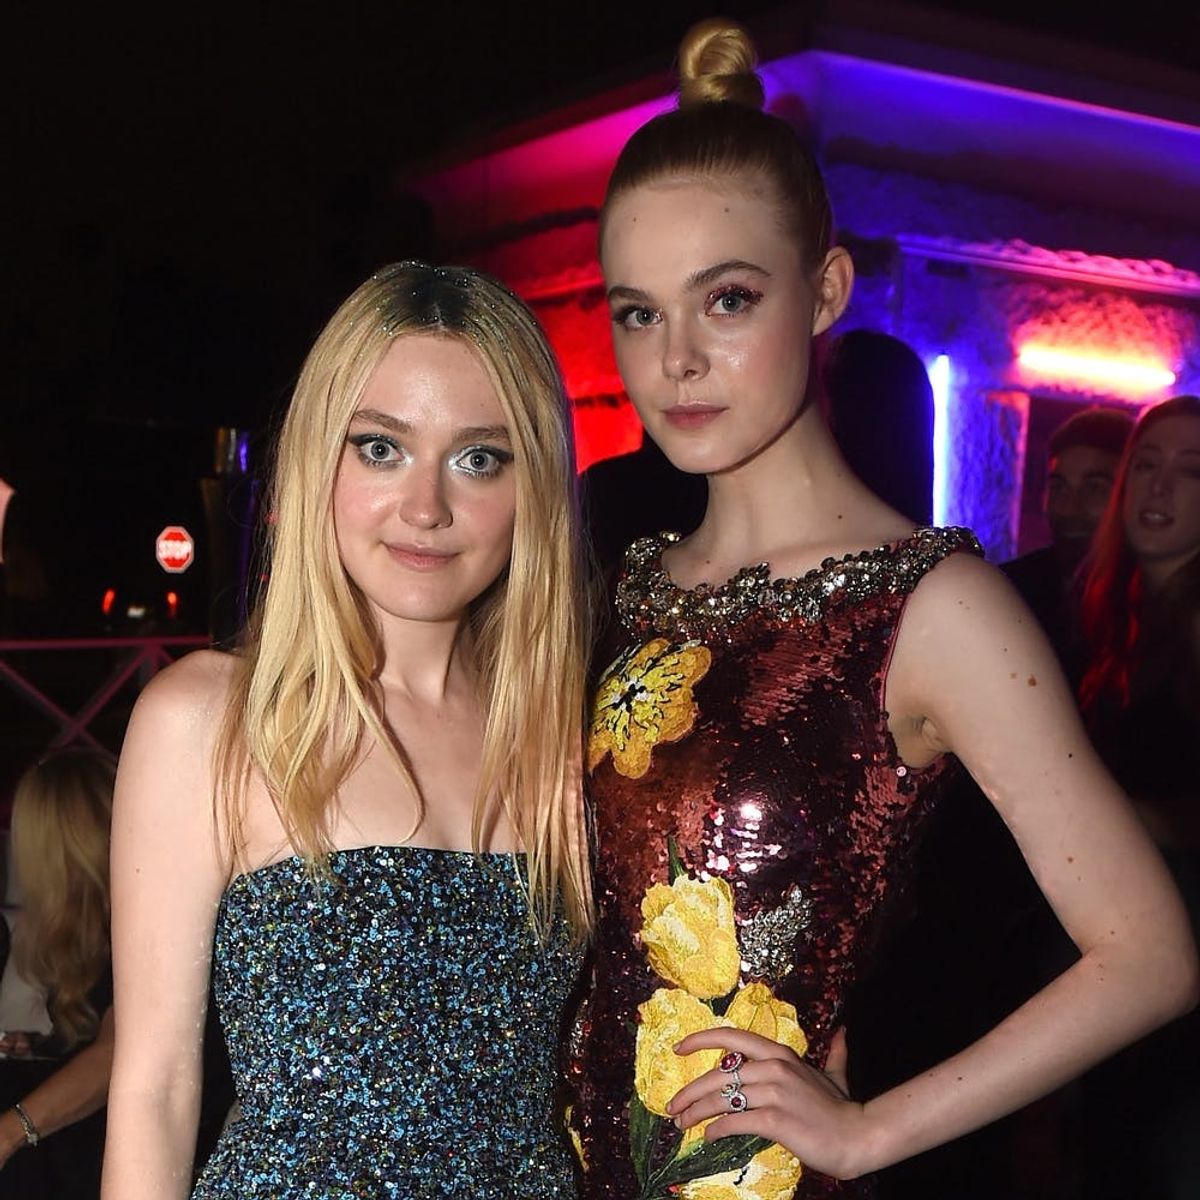 Dakota Fanning’s Tribute to Elle Fanning on Her 19th Birthday Will Make You Want to Hug Your Sister